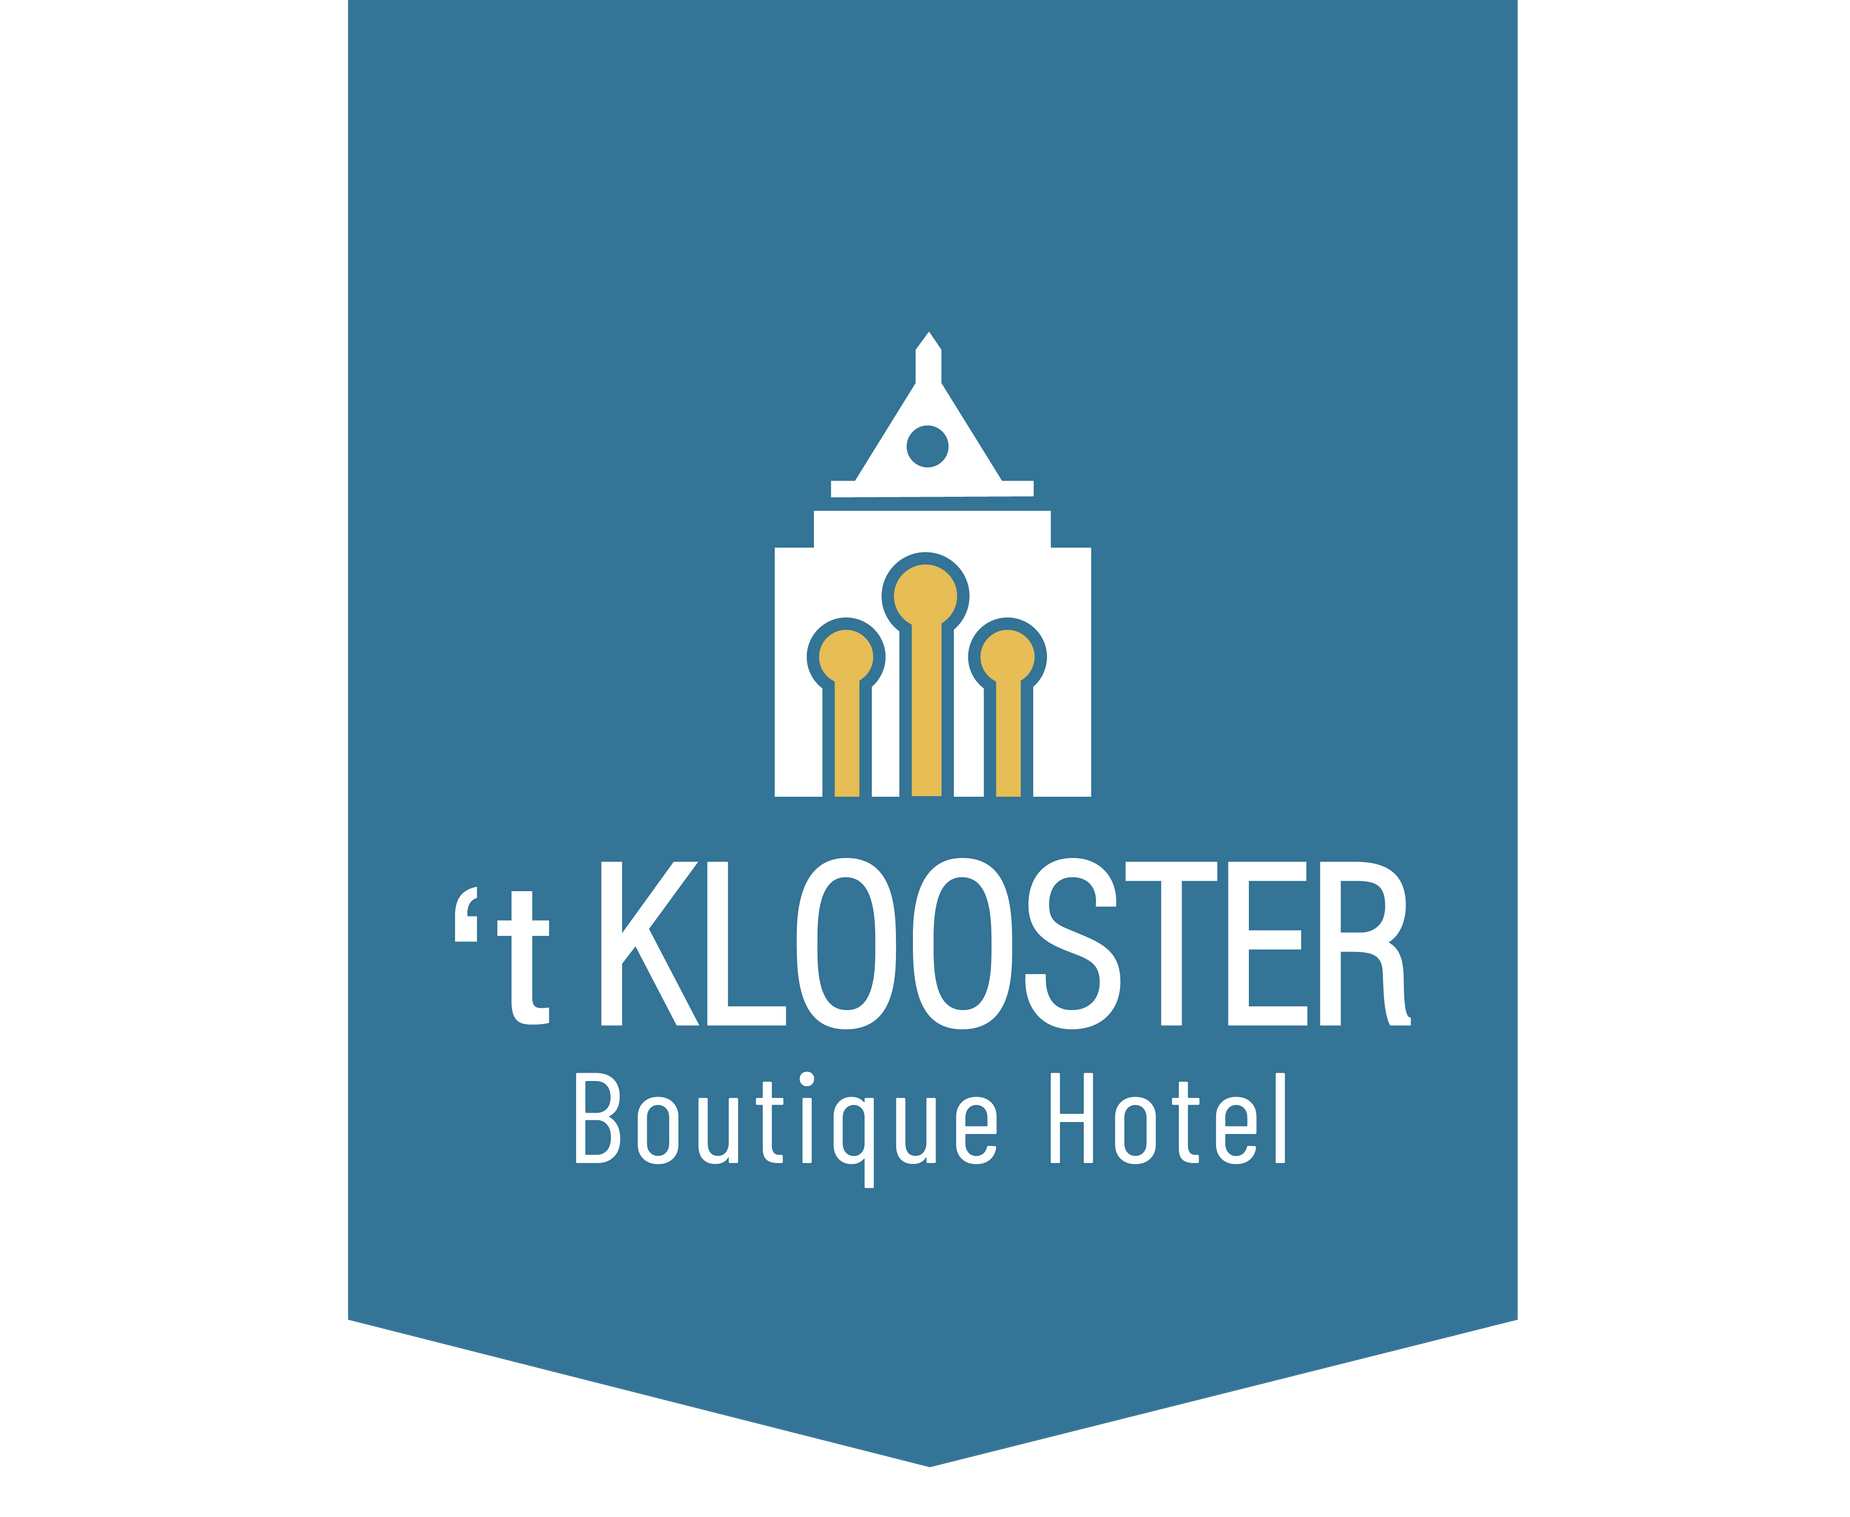 Boutique Hotel 't Klooster - Curaçao